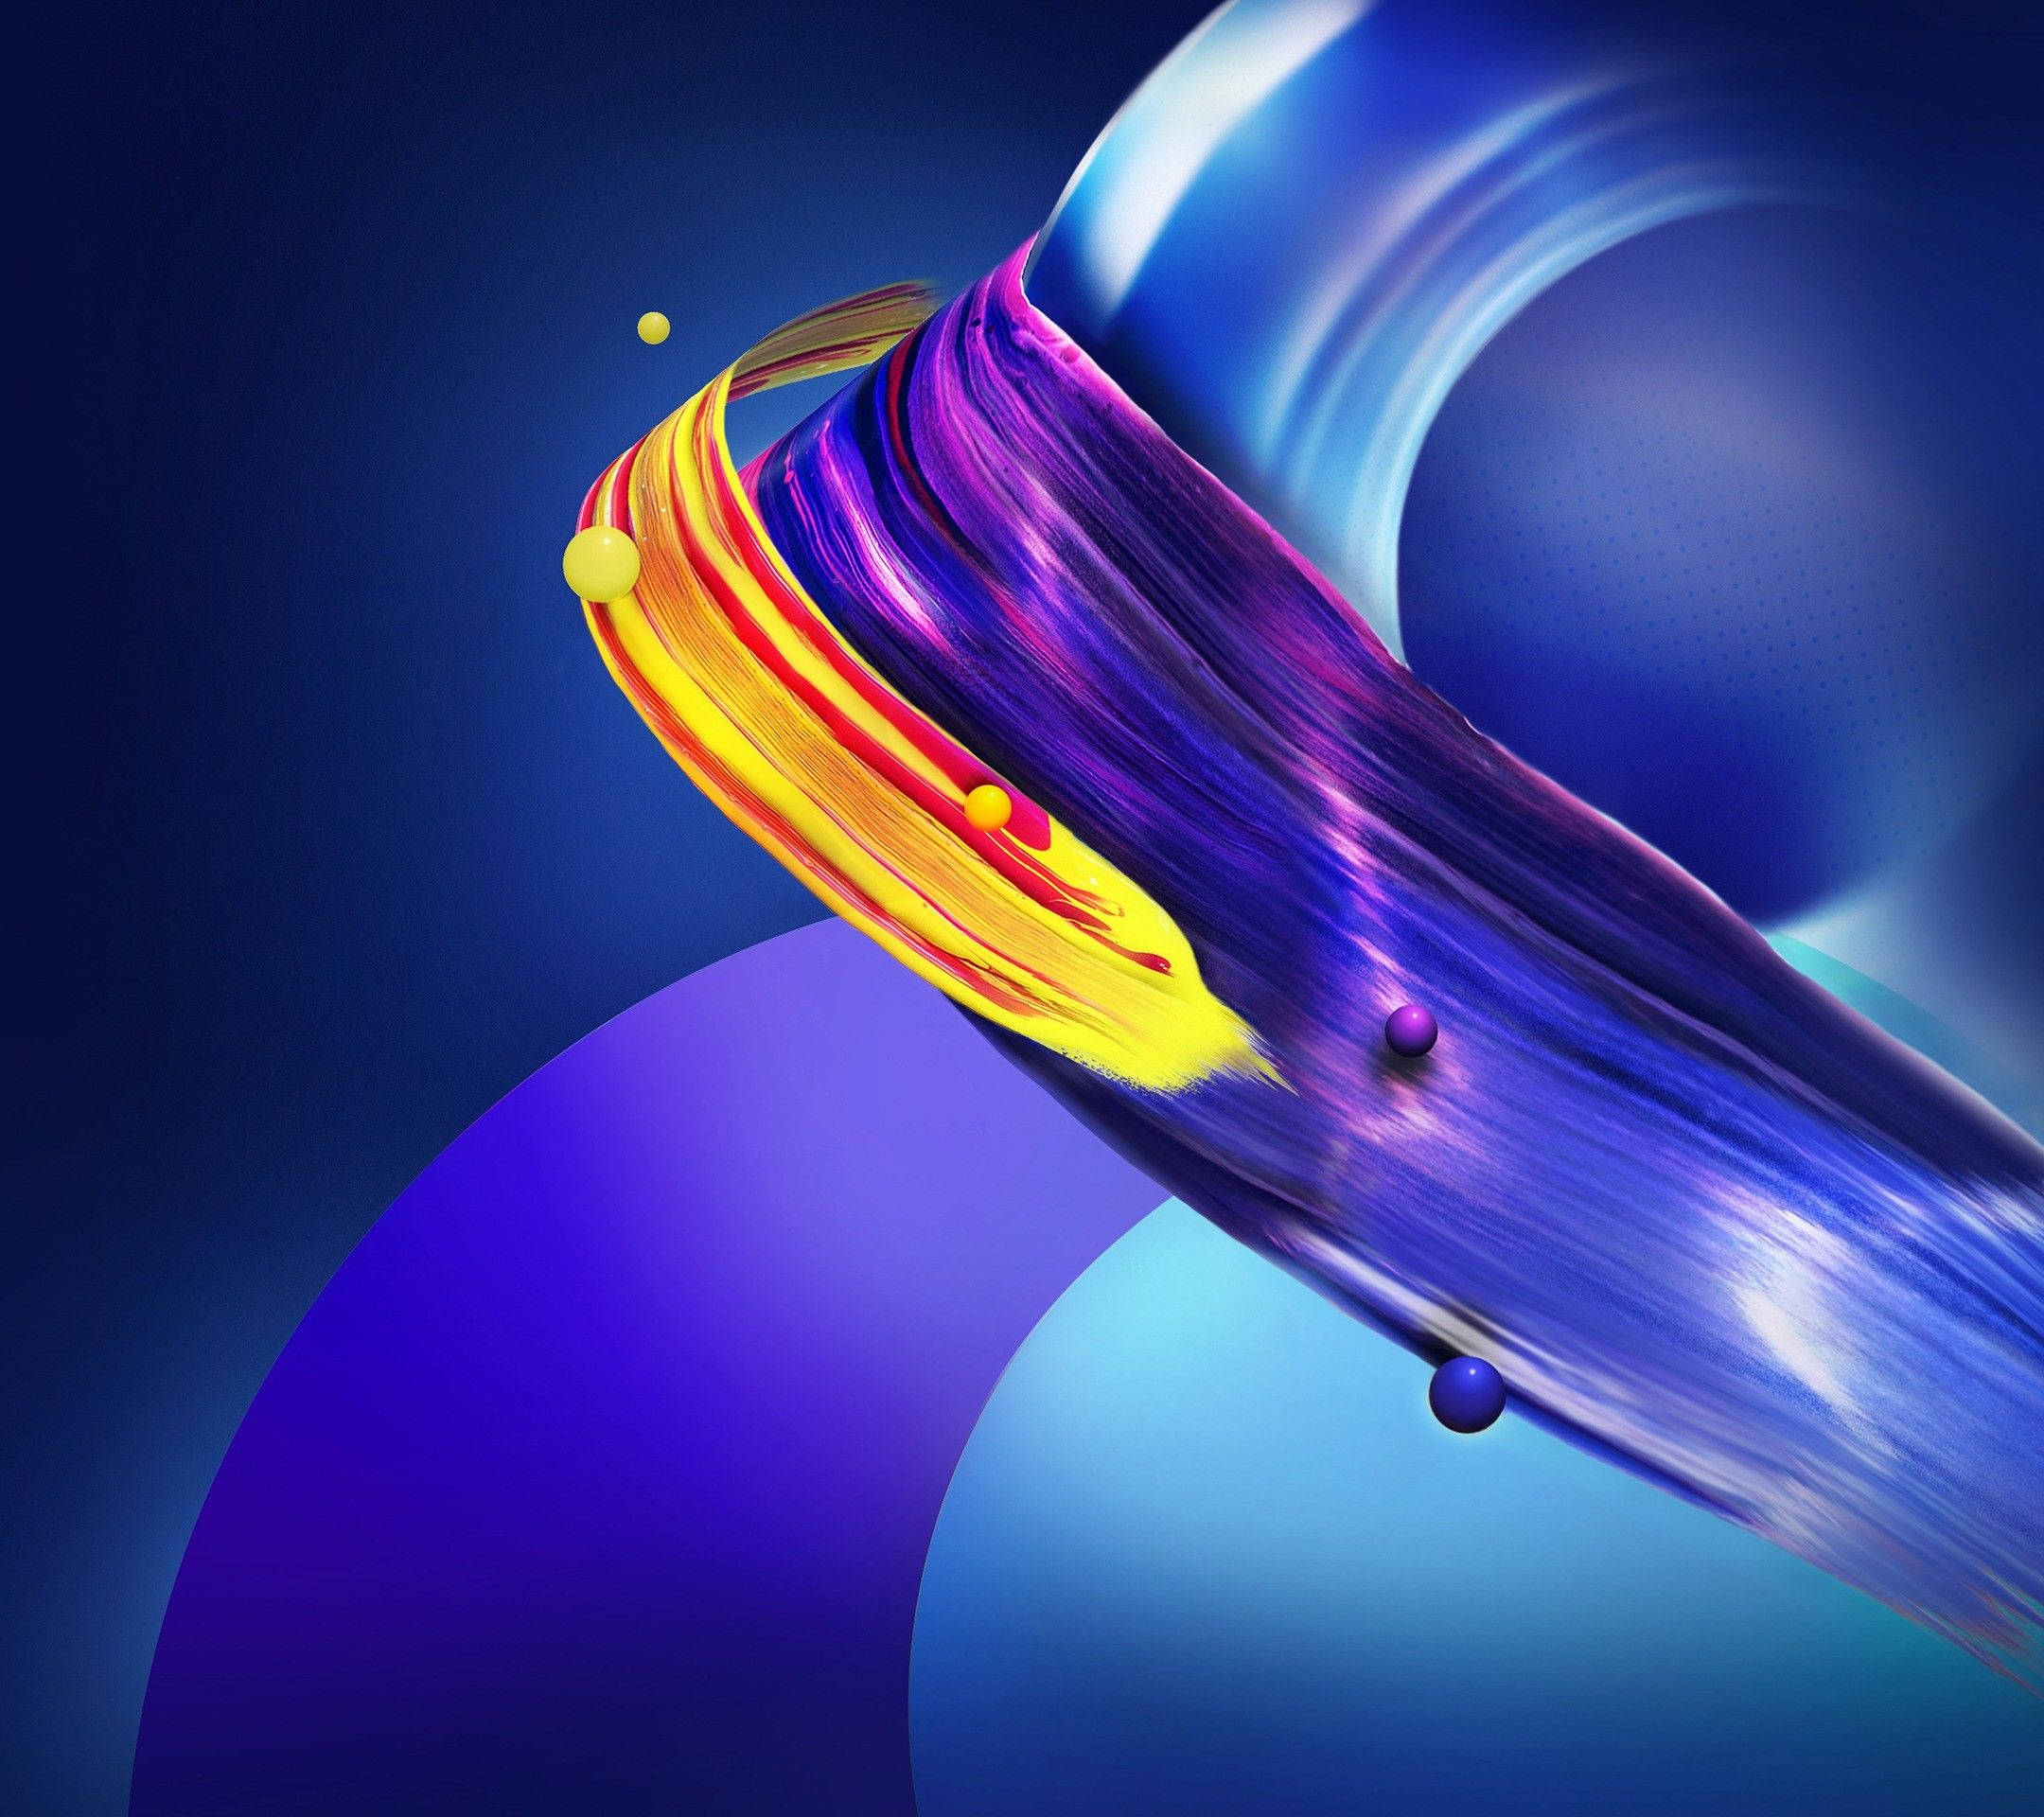 Mesmerizing Abstract Curves Graphic Design Wallpaper